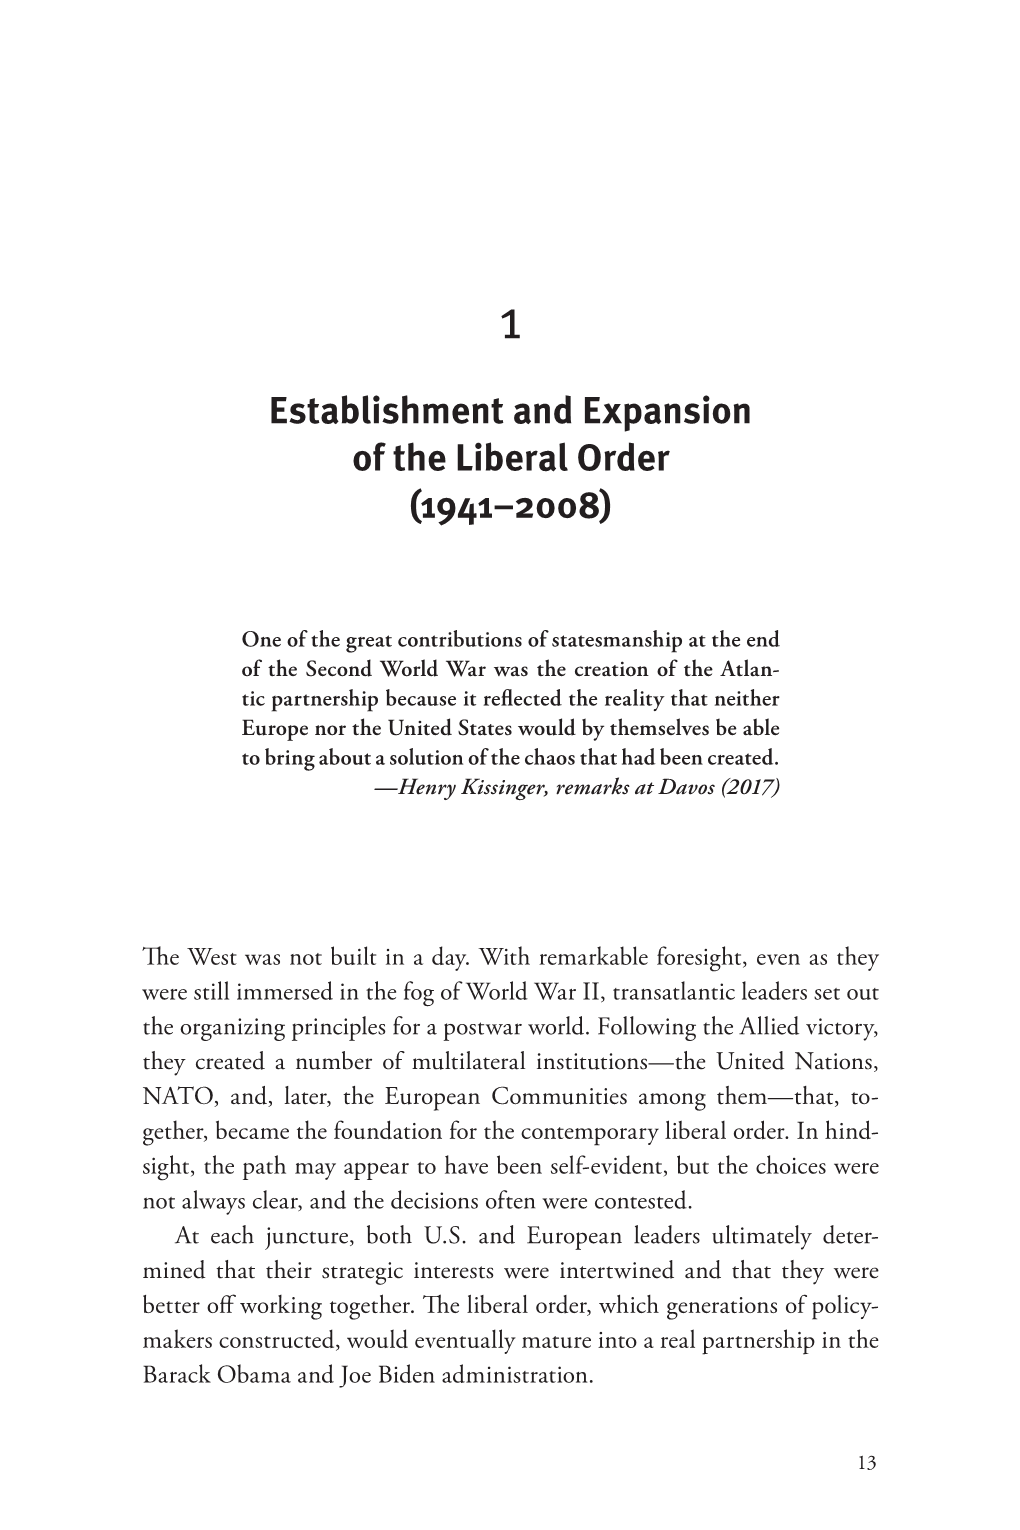 Establishment and Expansion of the Liberal Order (1941–2008)